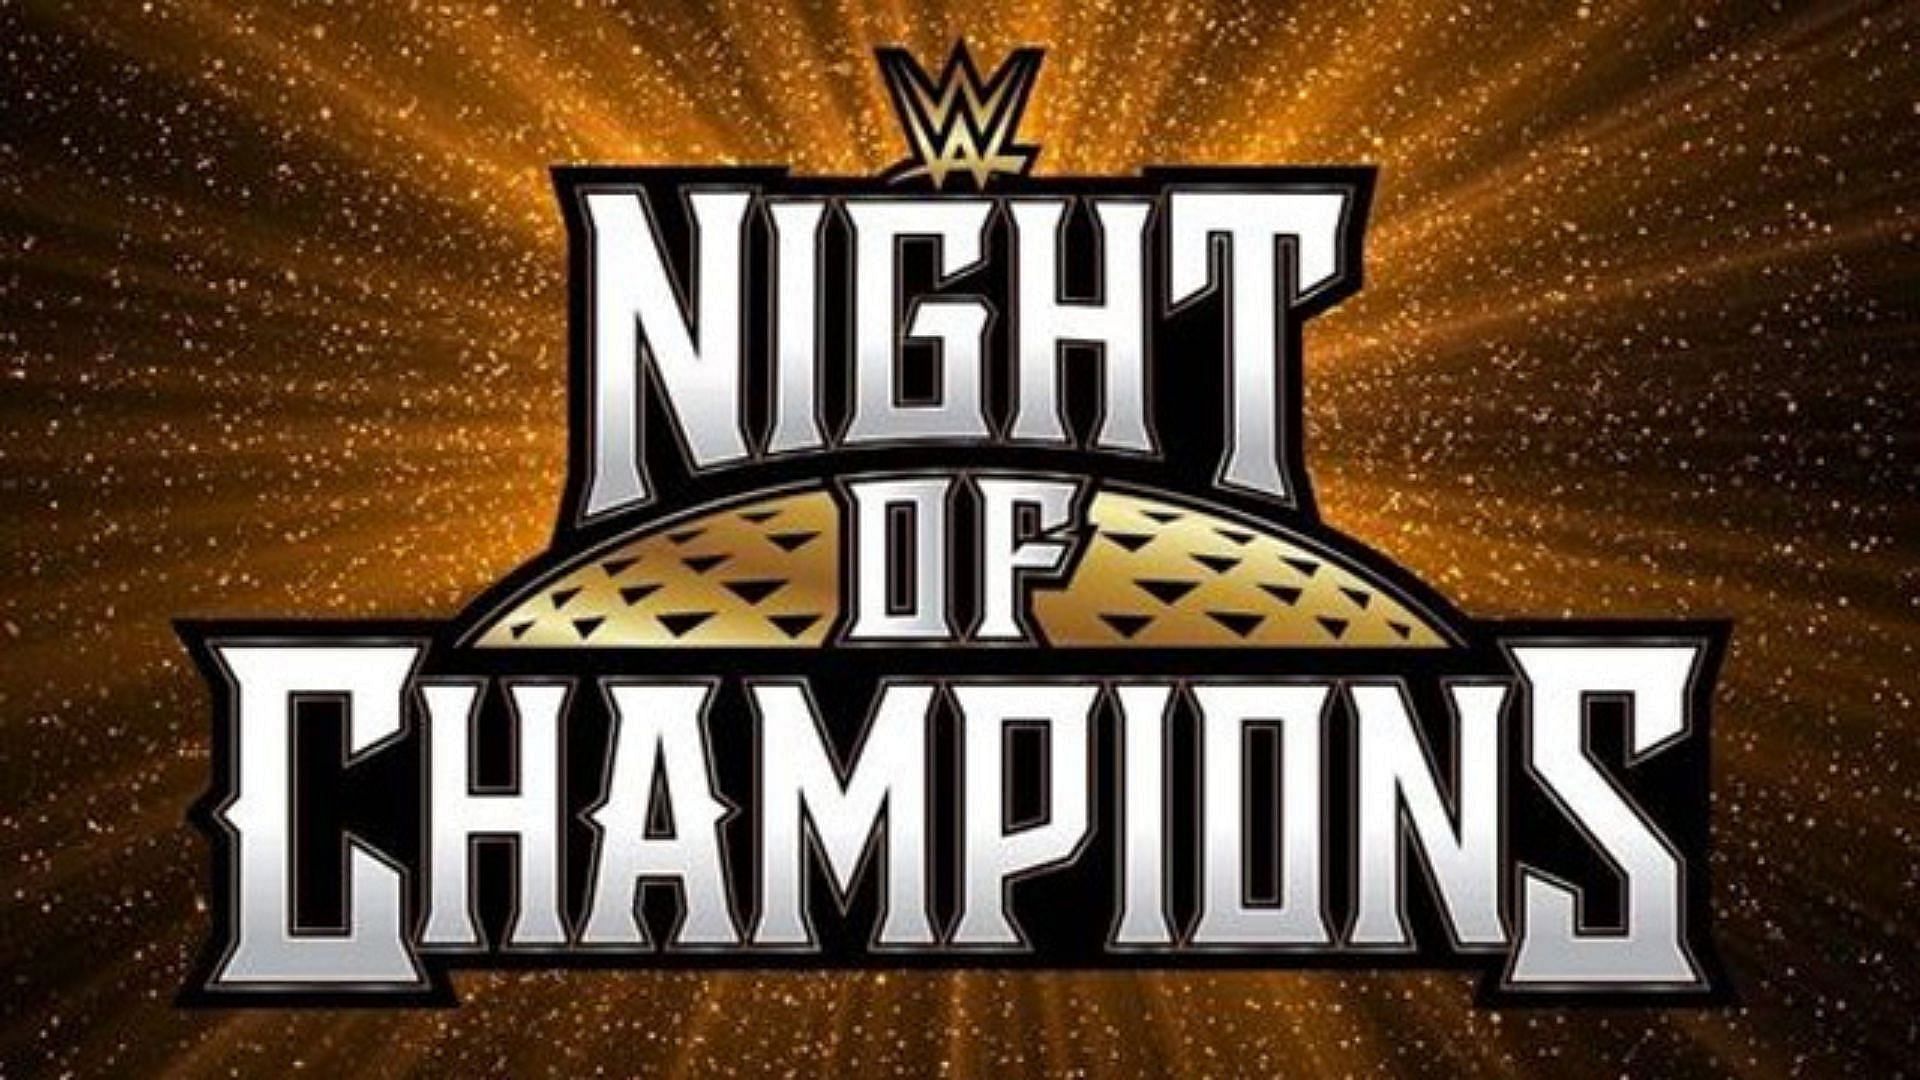 Night of Champions will emanate from the Jeddah Superdome in Saudi Arabia